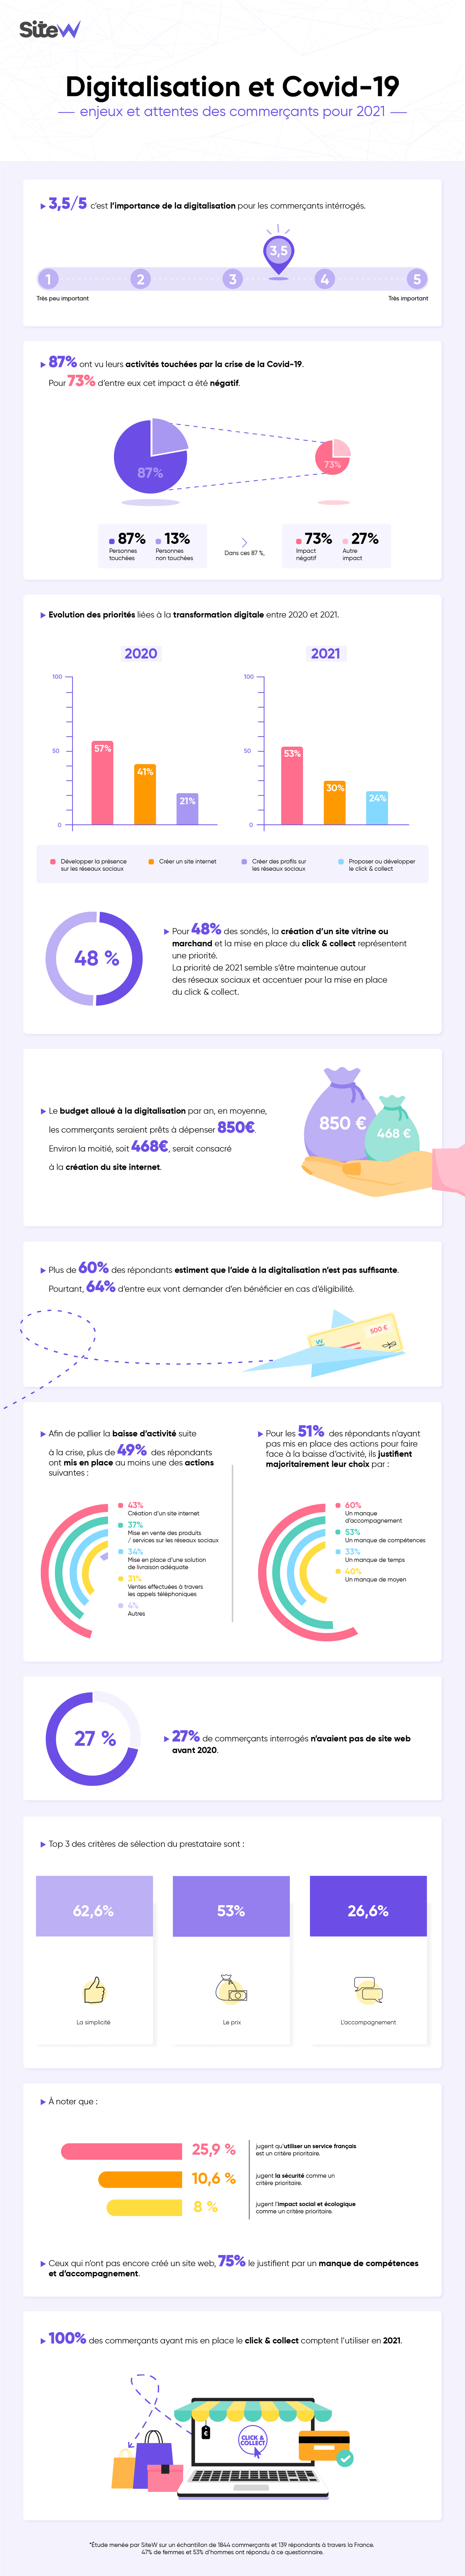 infographie-questionnaire-digitalisation-covid-sitew-2021.png